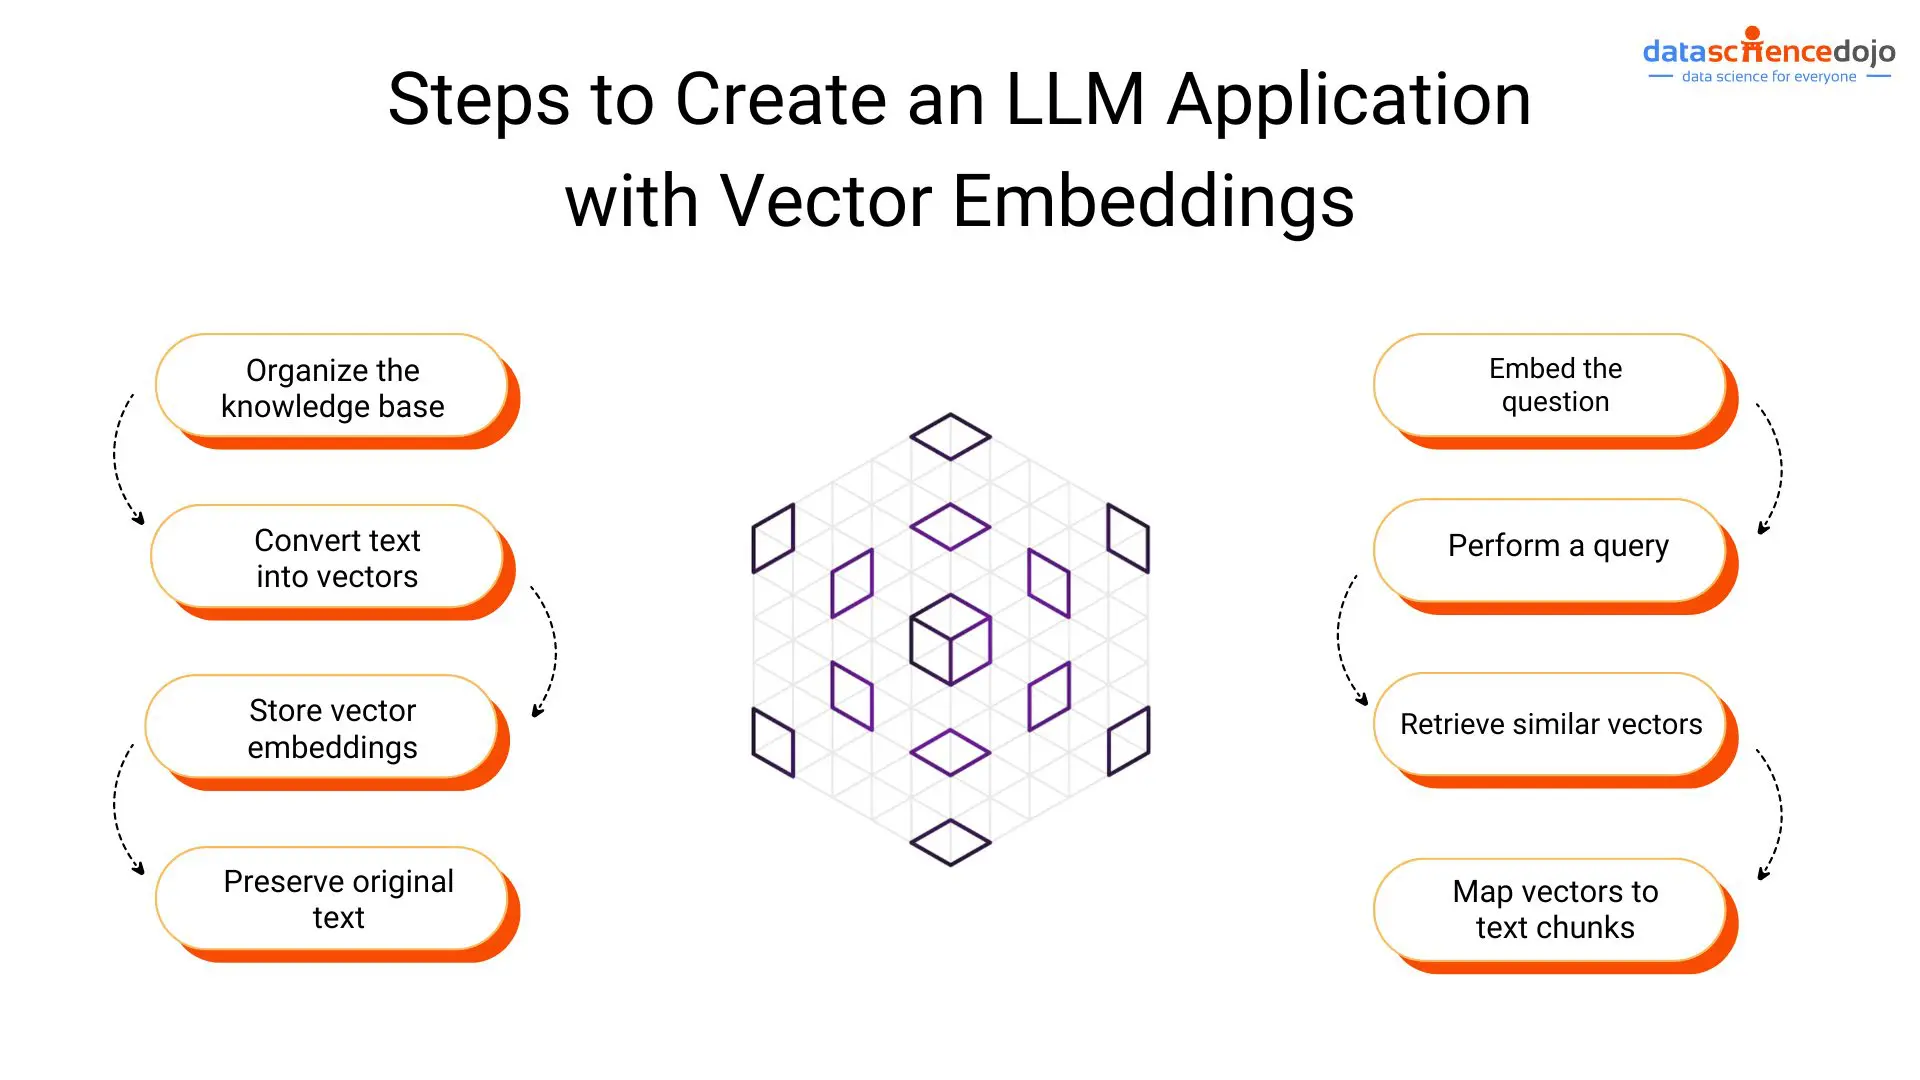 Building LLM applications with vector embeddings